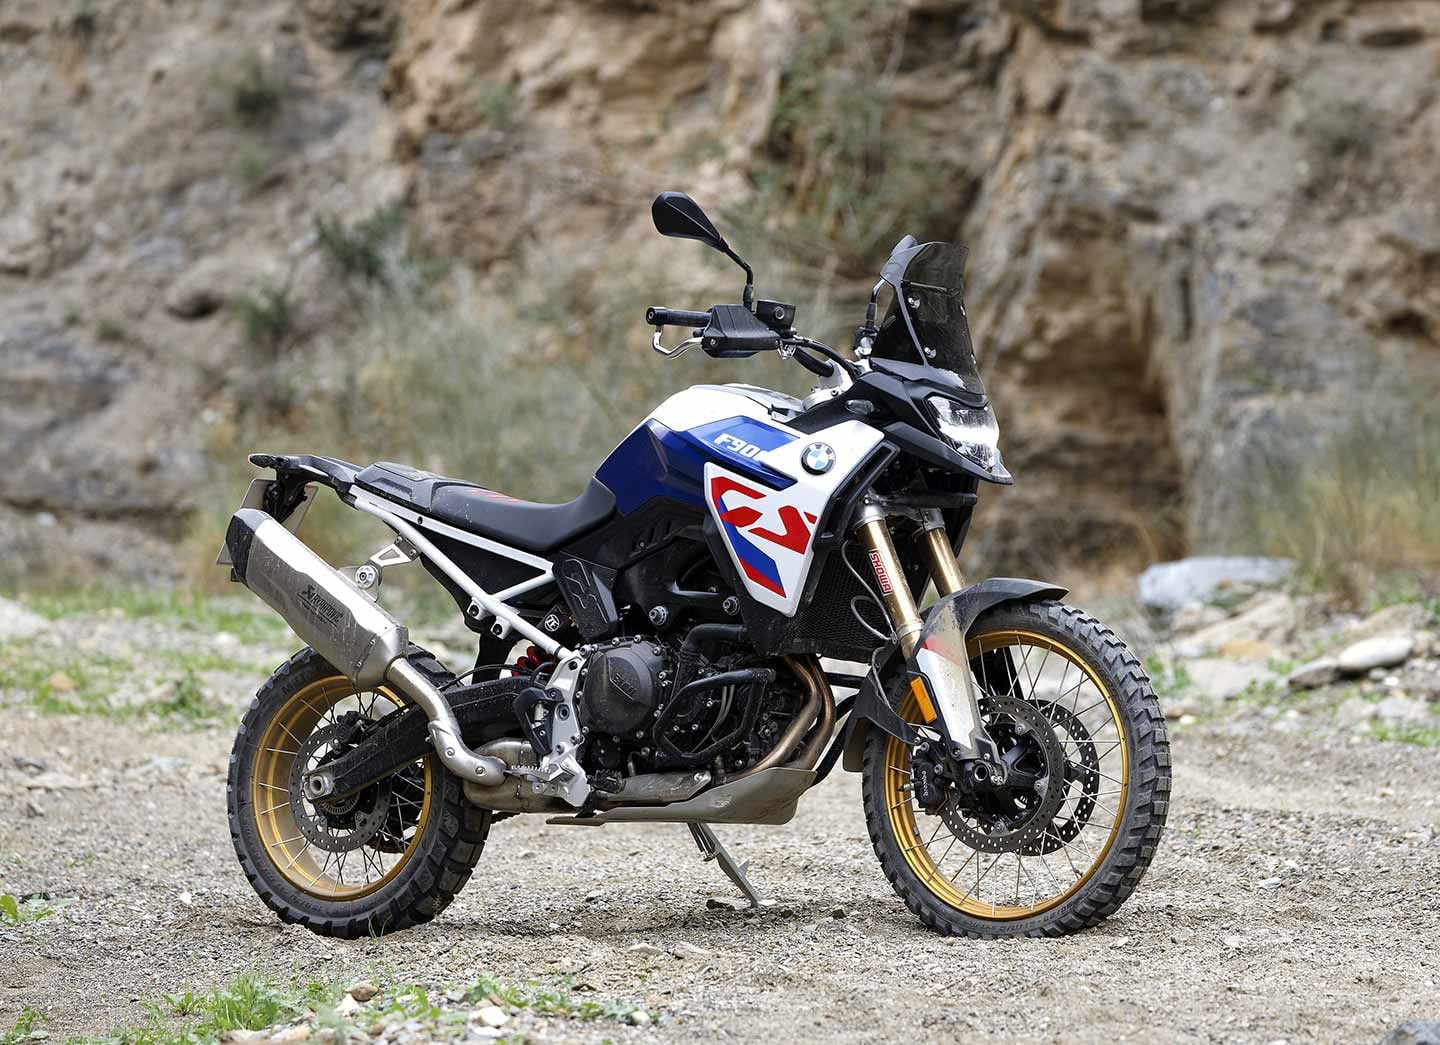 Slim and trim: In the process of getting new bodywork, a narrower tailsection, and a new plastic gas tank, the F 900 GS managed to drop more than 30 pounds.